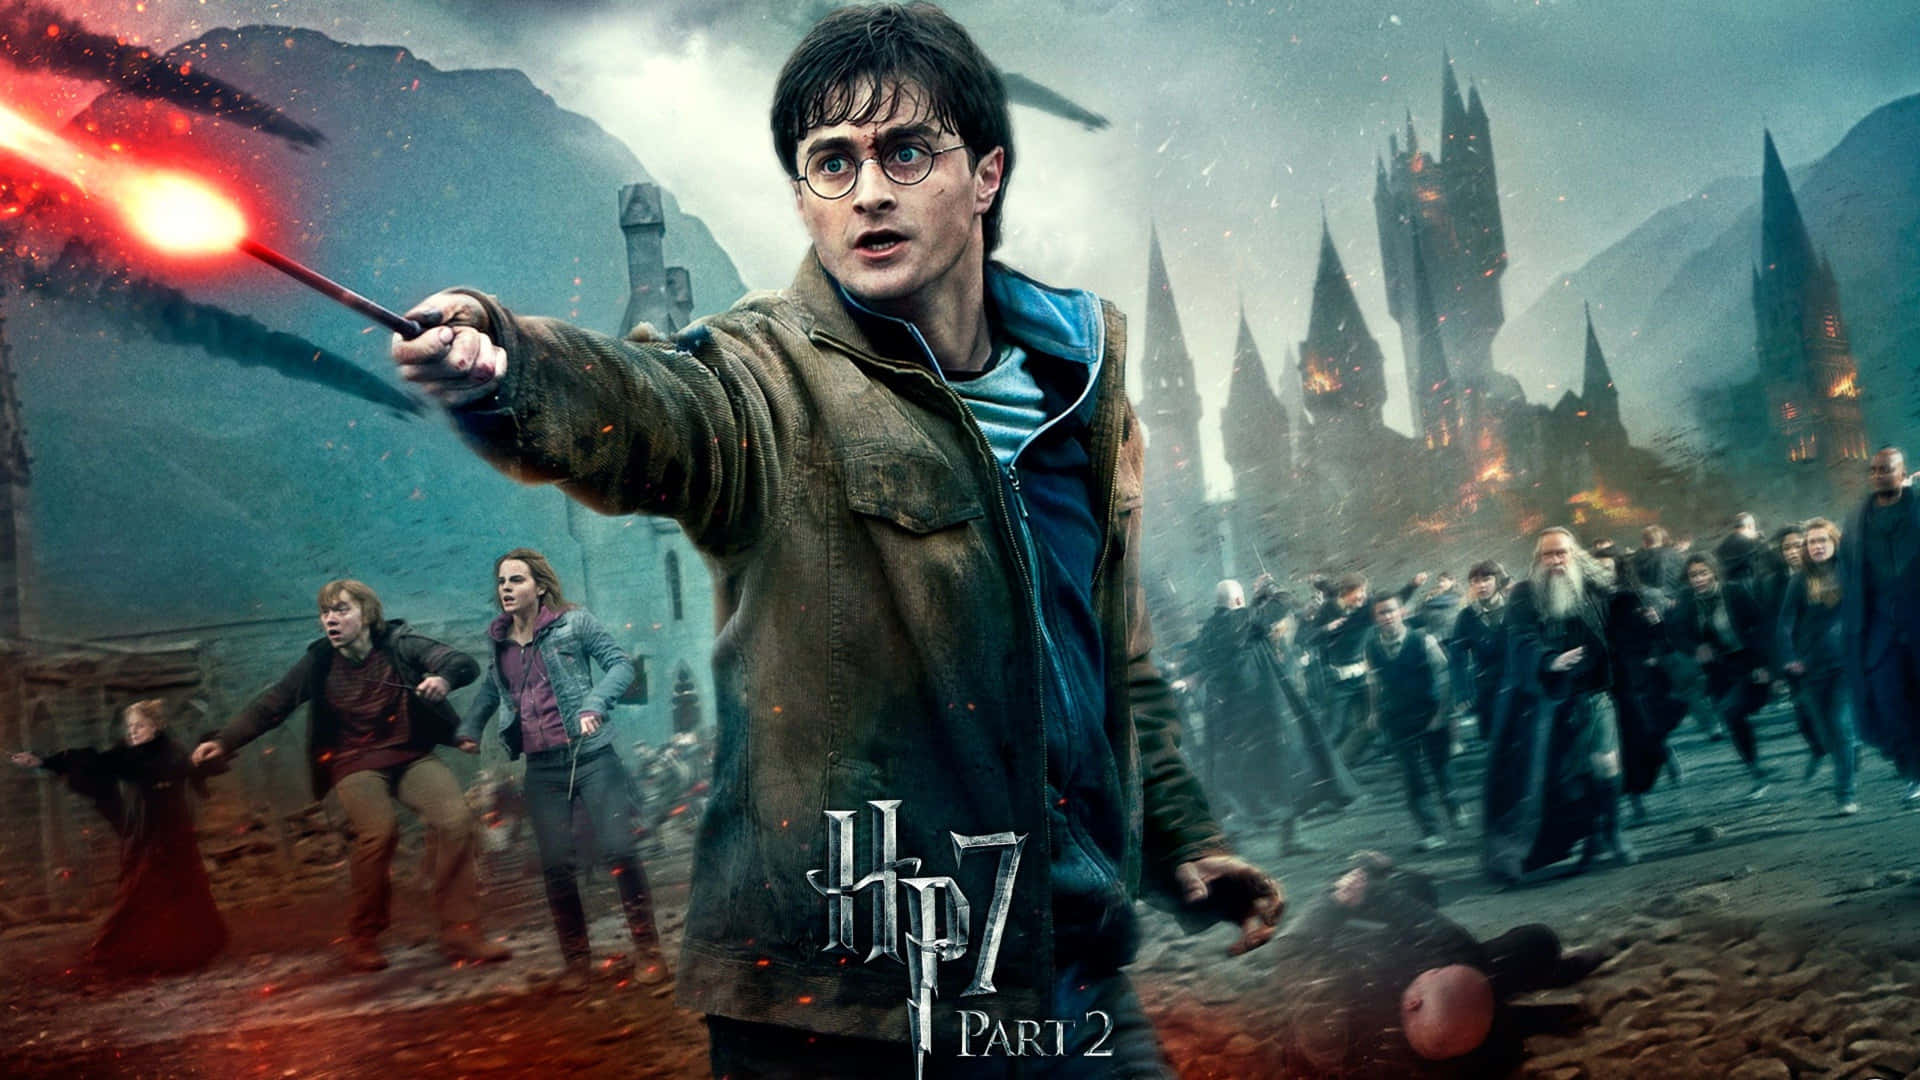 Unlock the power of 4K with the stunning Harry Potter 4K Ultra High Definition Wallpaper Wallpaper